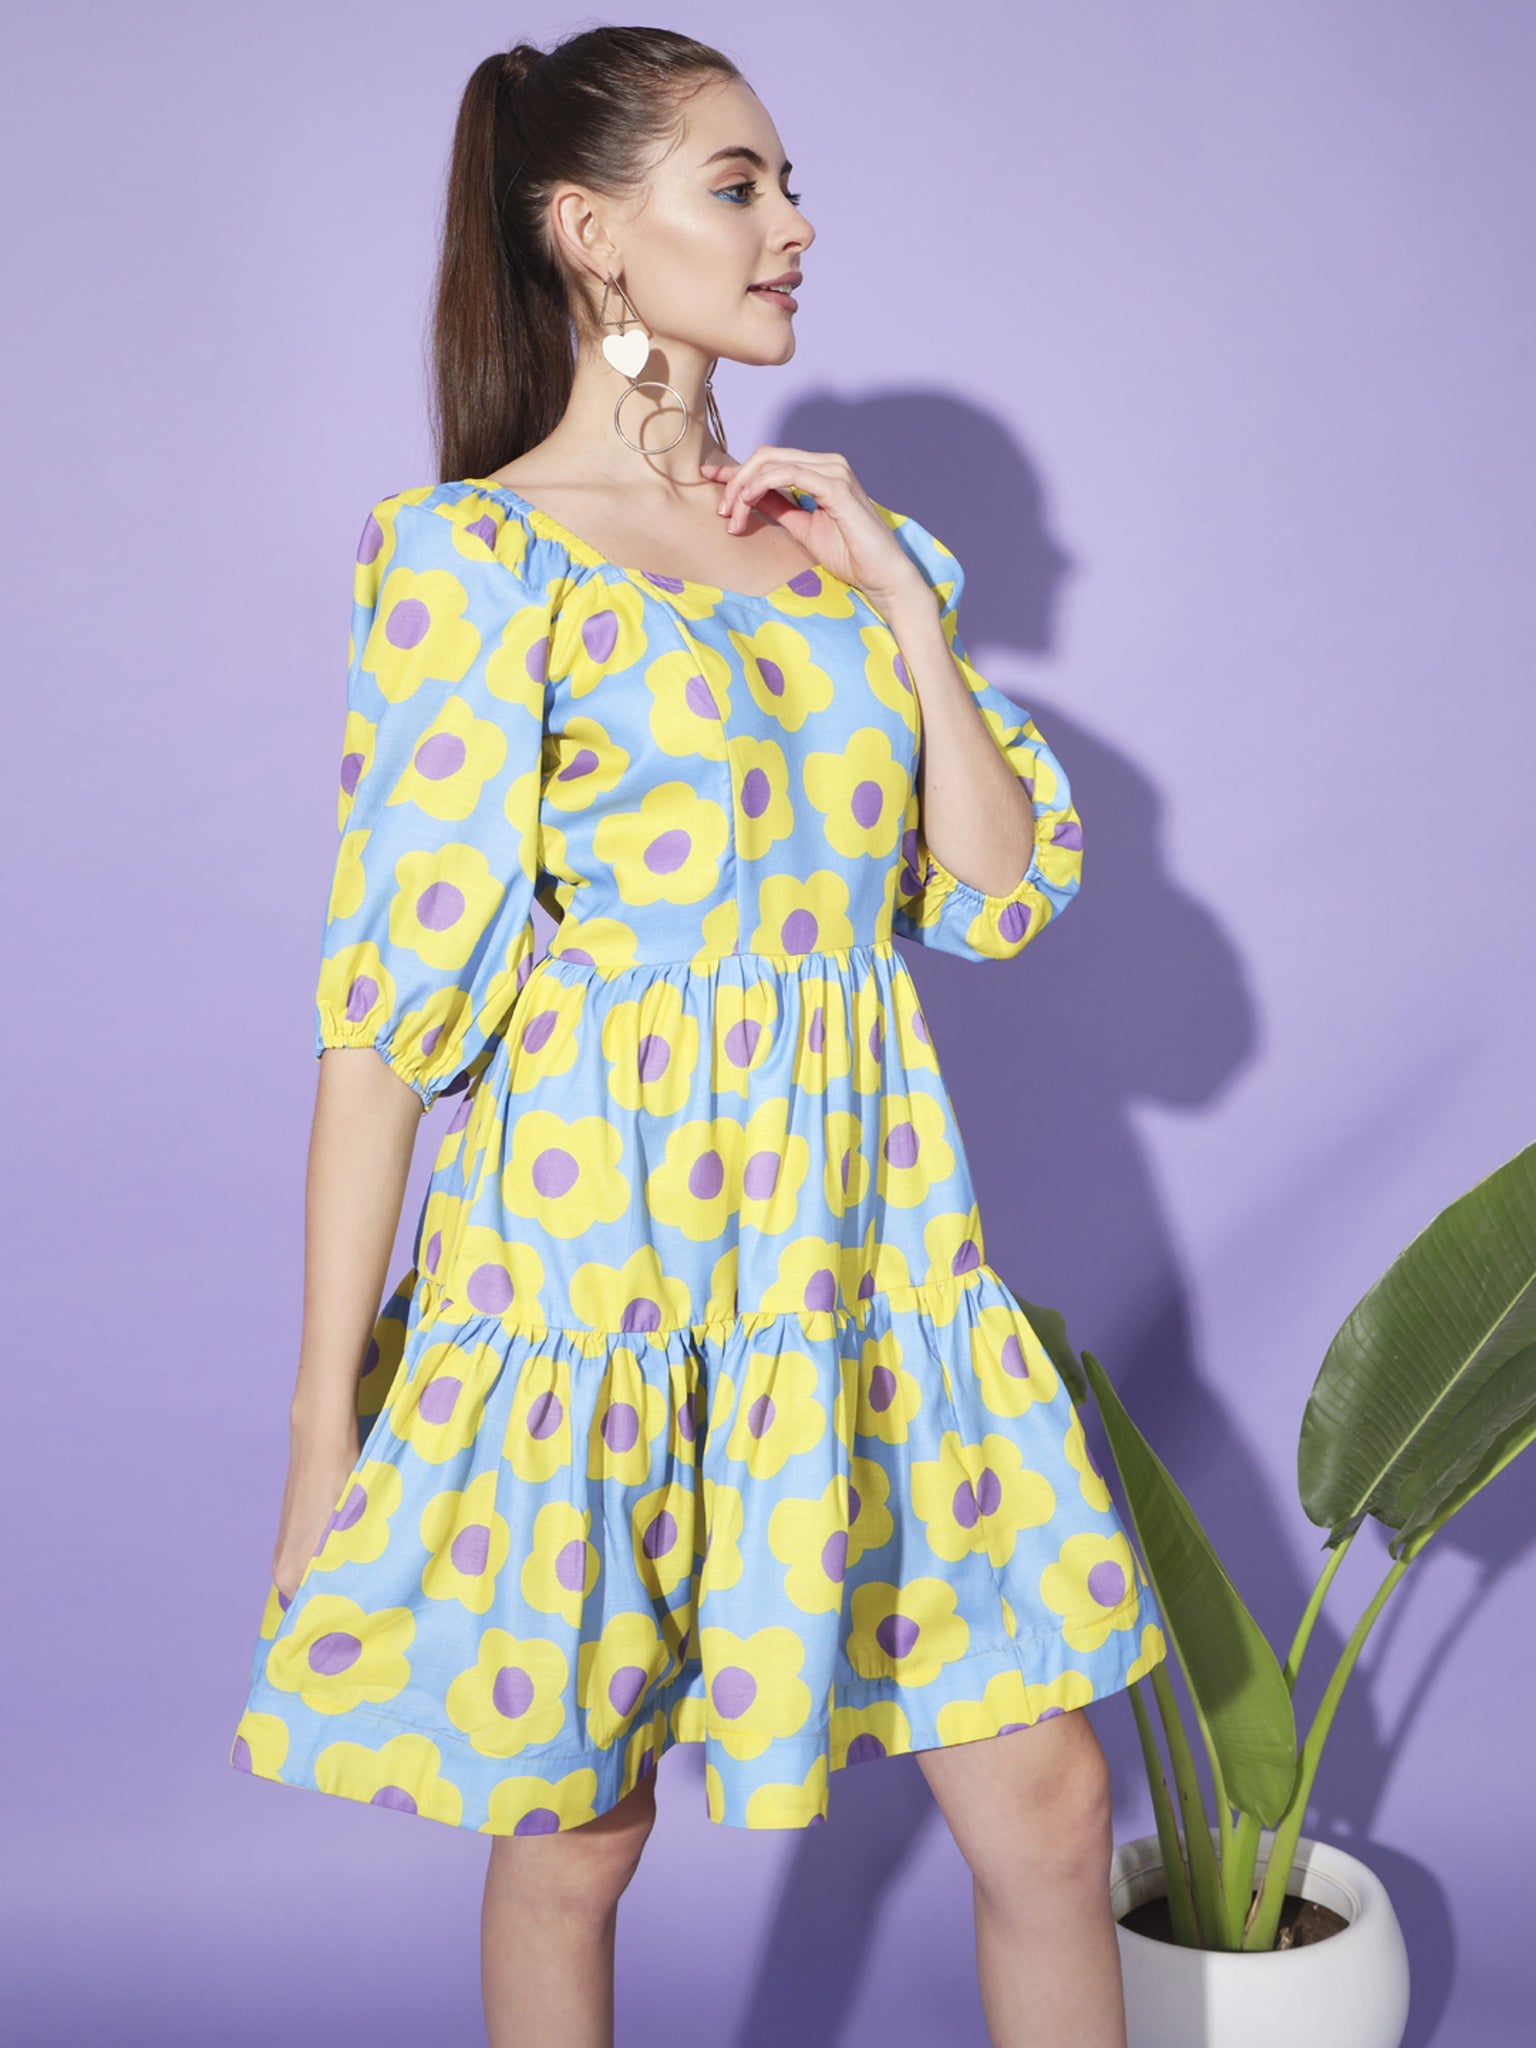 Harmony in Blue and Yellow Floral Dress